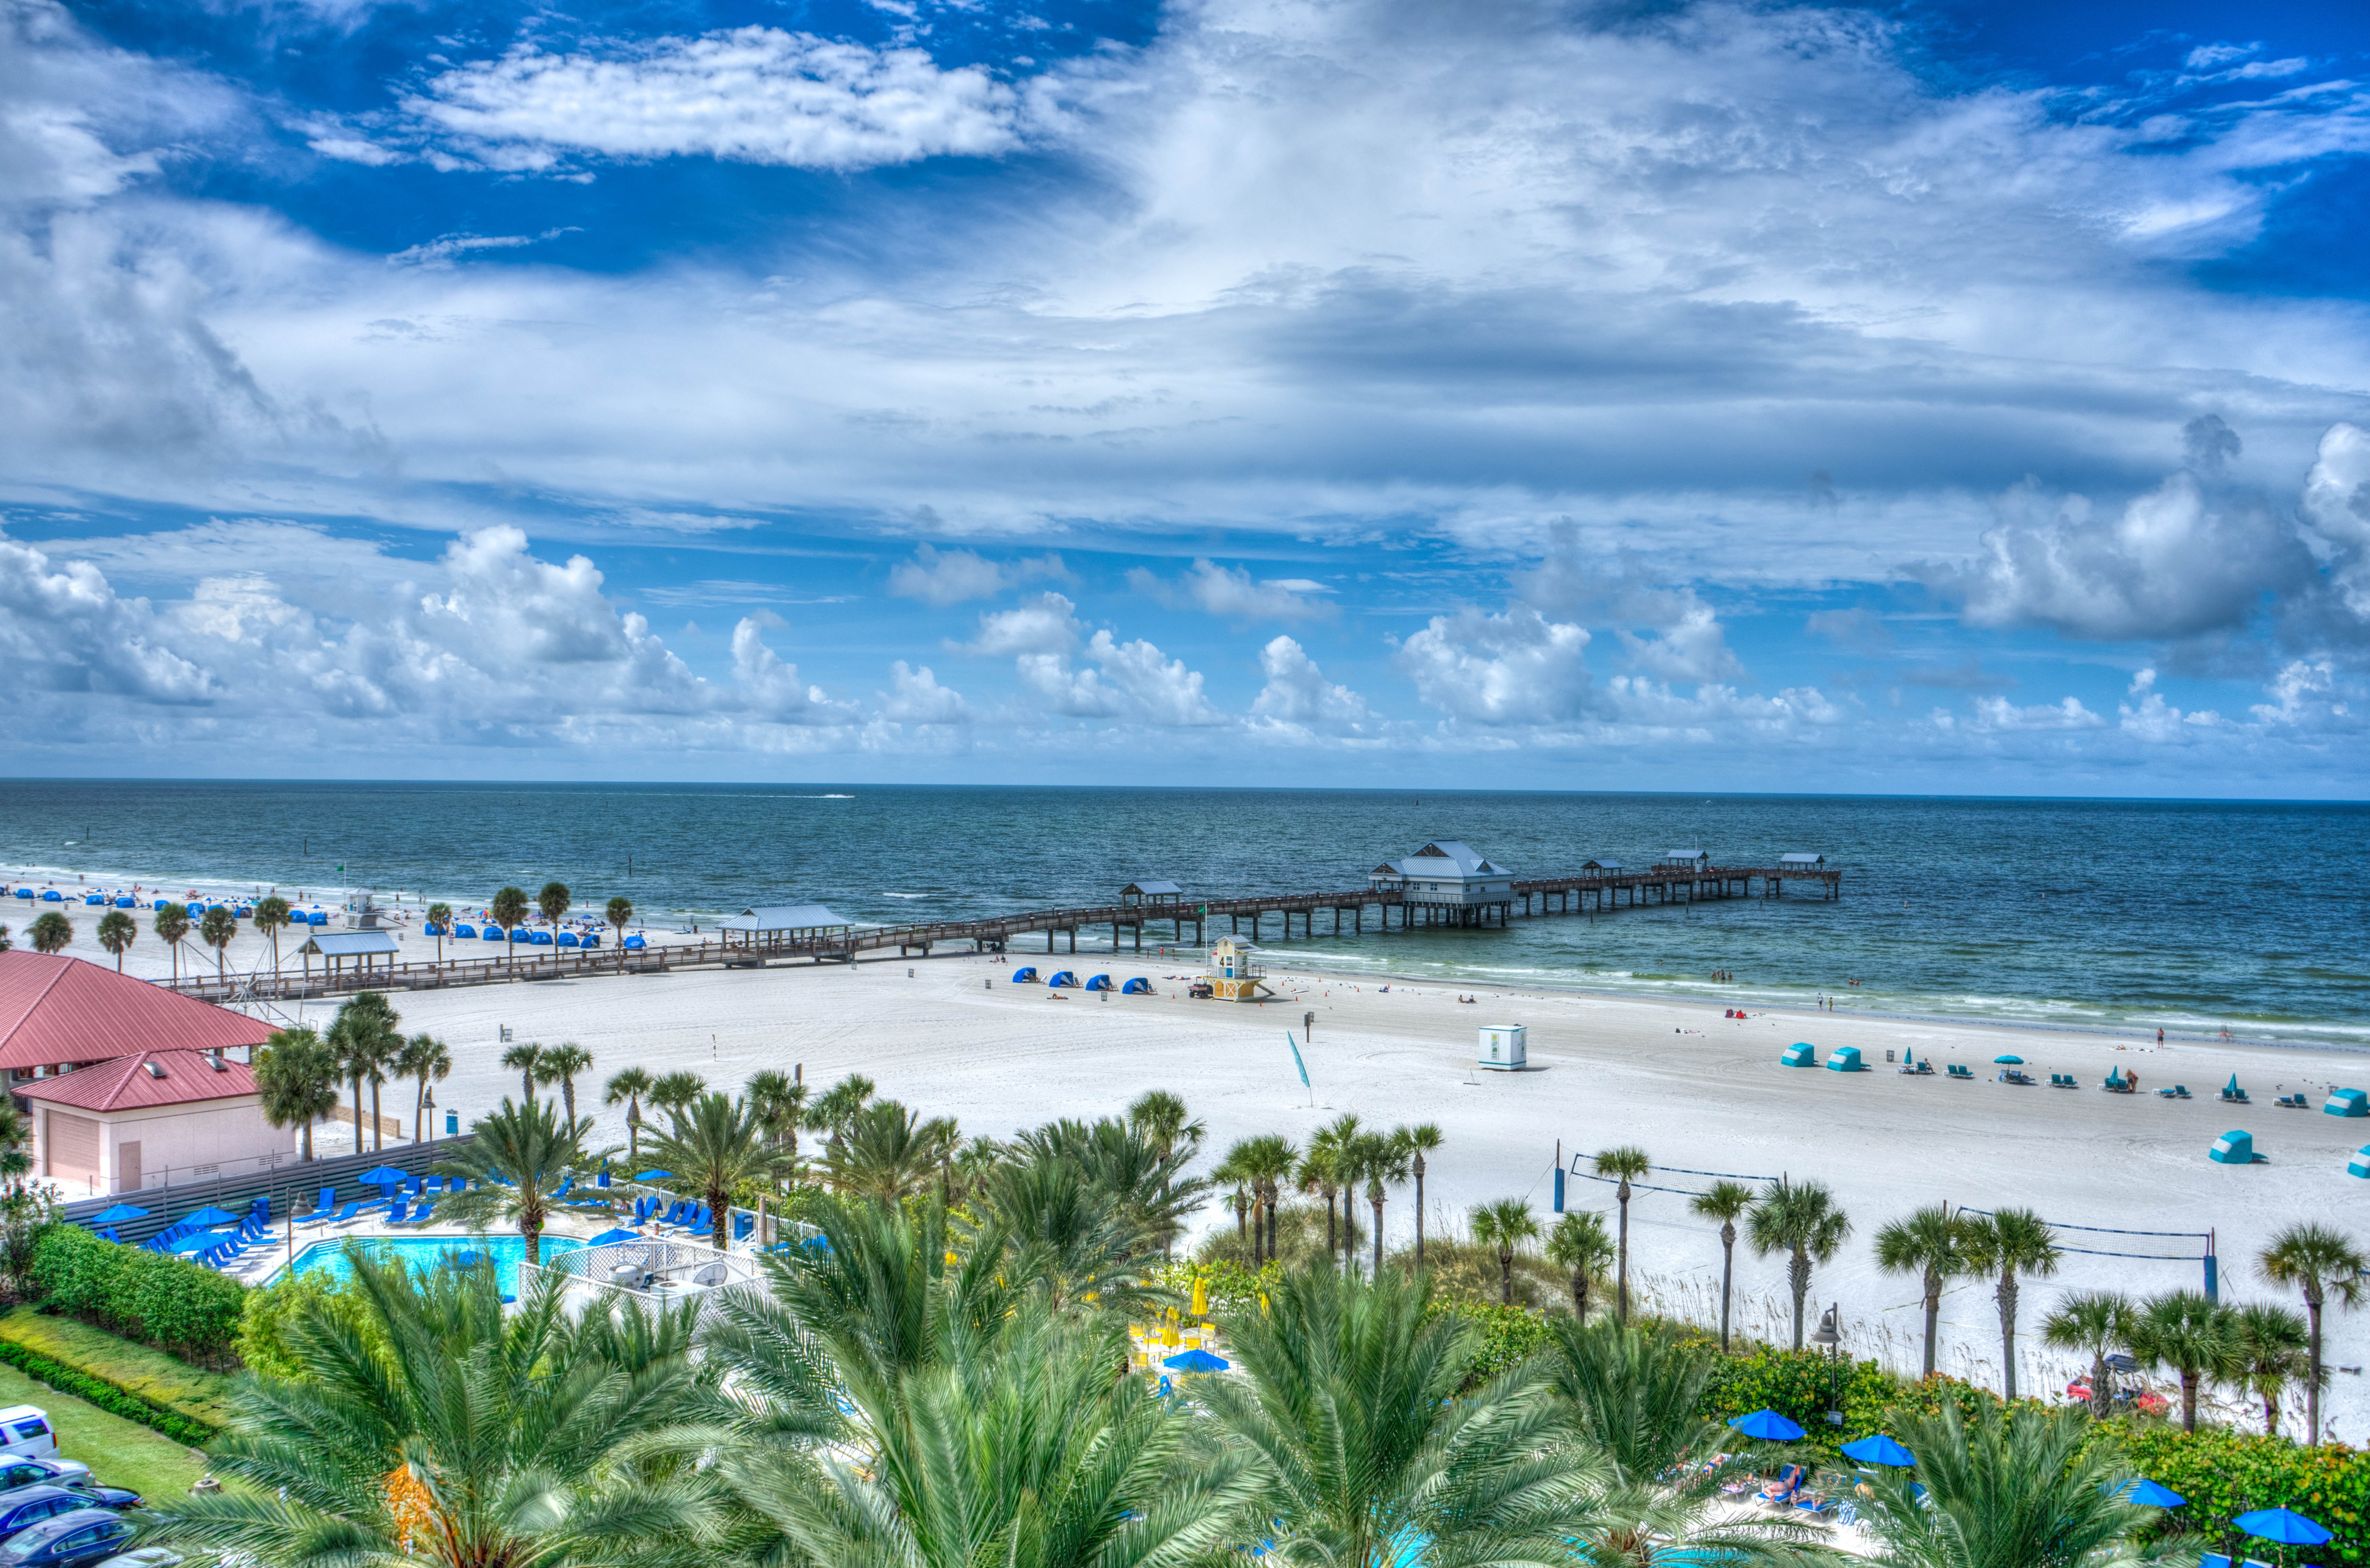 When Is The Best Time To Visit Clearwater Beach?